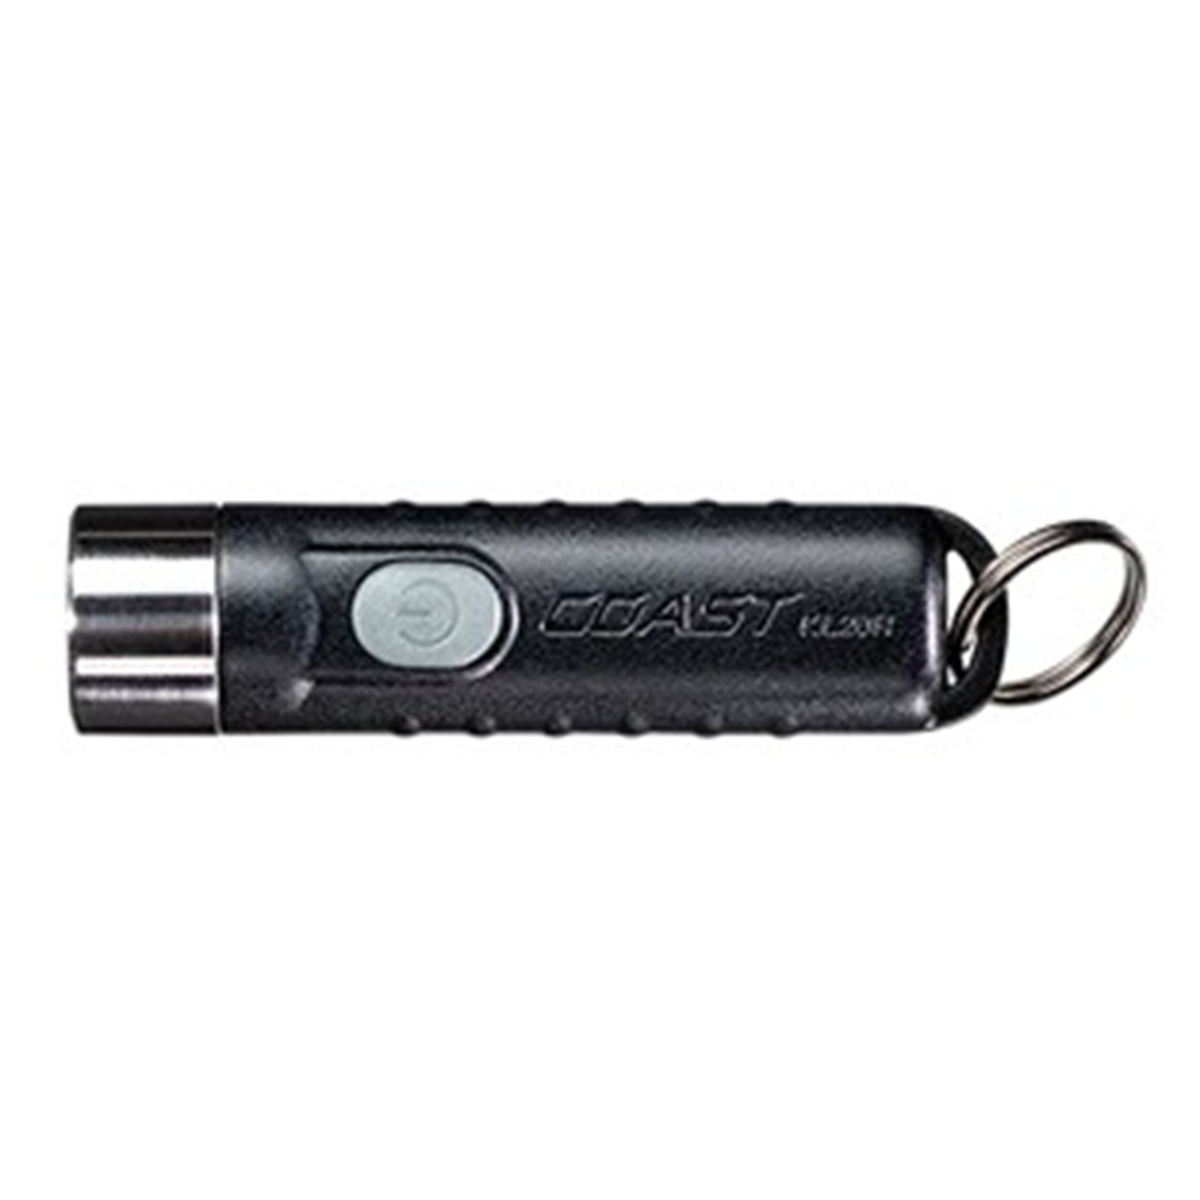 Picture of Coast Products COS30897 KLR22R 380 Lumen Rechargeable Mini Light